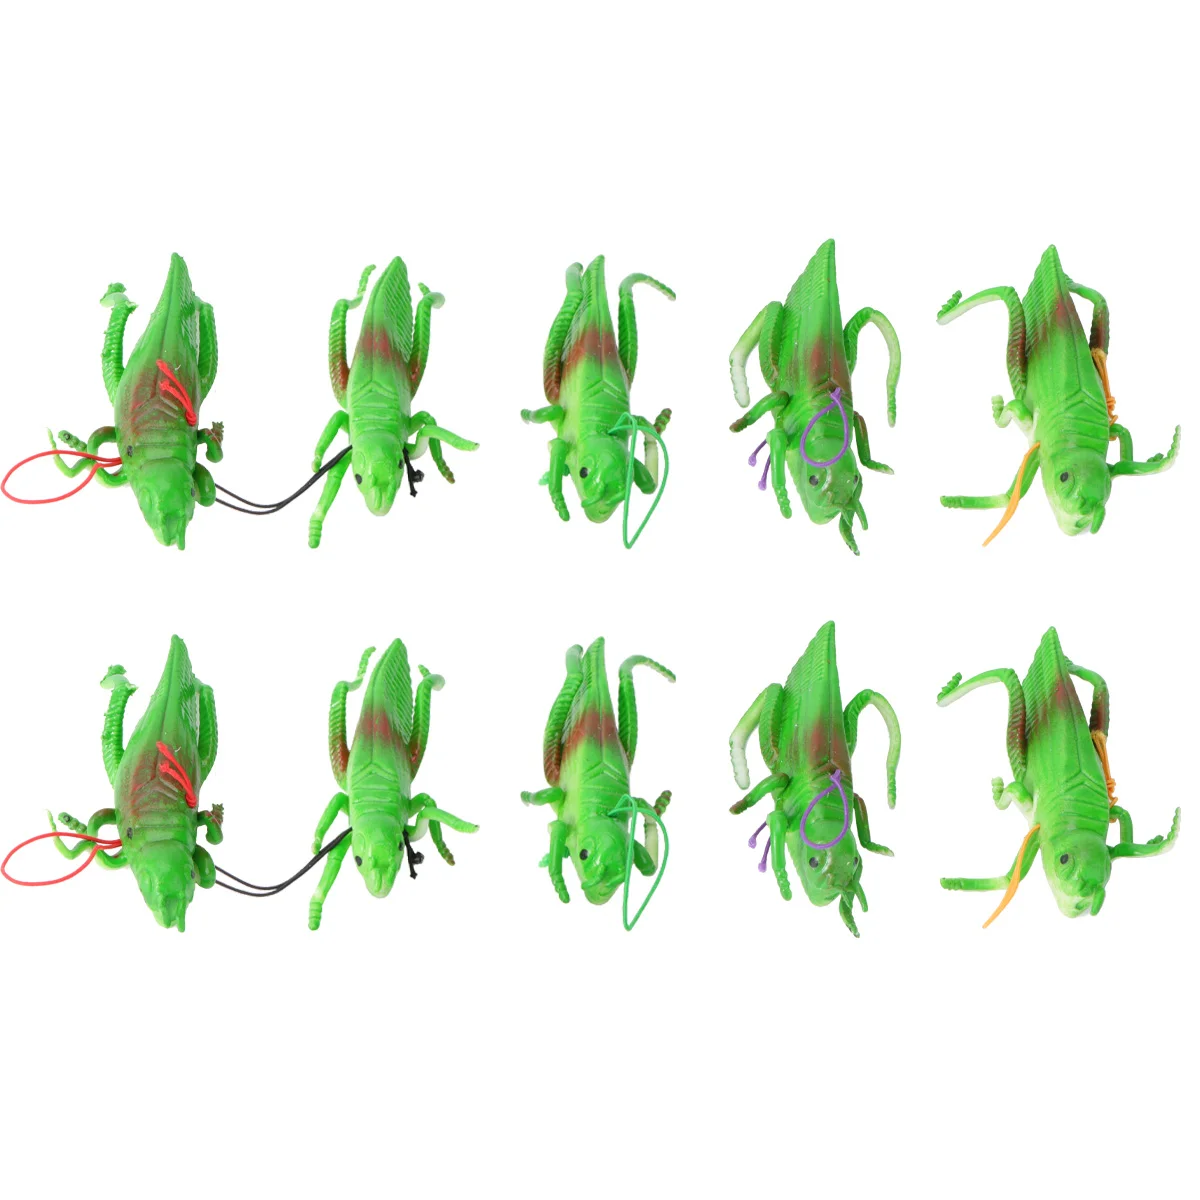 

Grasshopper Insect Figure: 10pcs Praying Mantis Figurines Model Insect Toys for Table Decor Garden Props